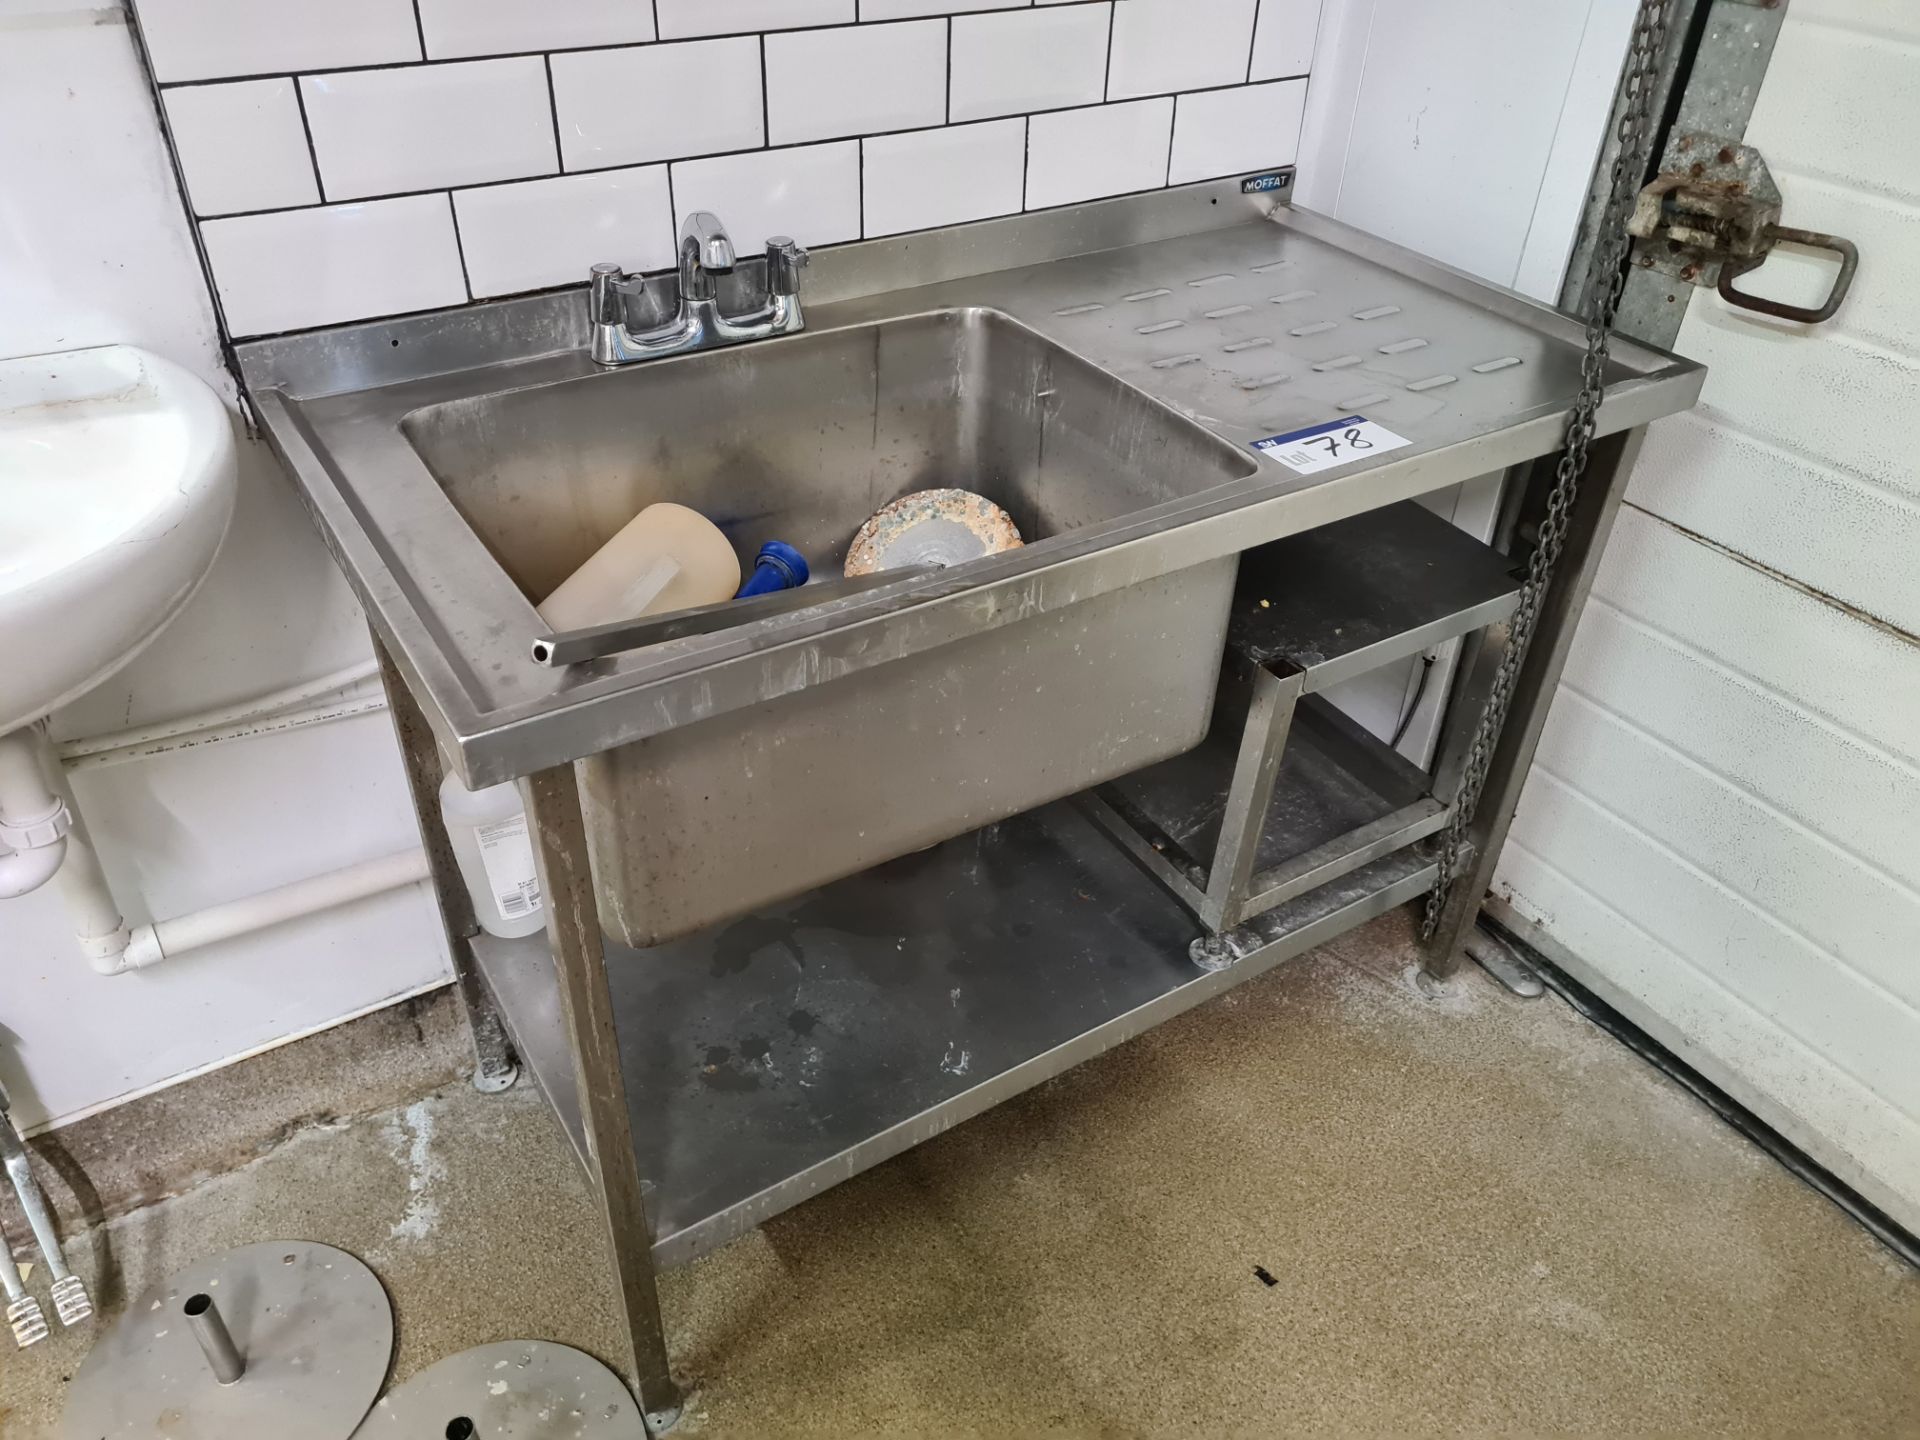 Stainless Steel Single Basin Sink Unit (Water and Waste Pipes Need Disconnecting and Capping)